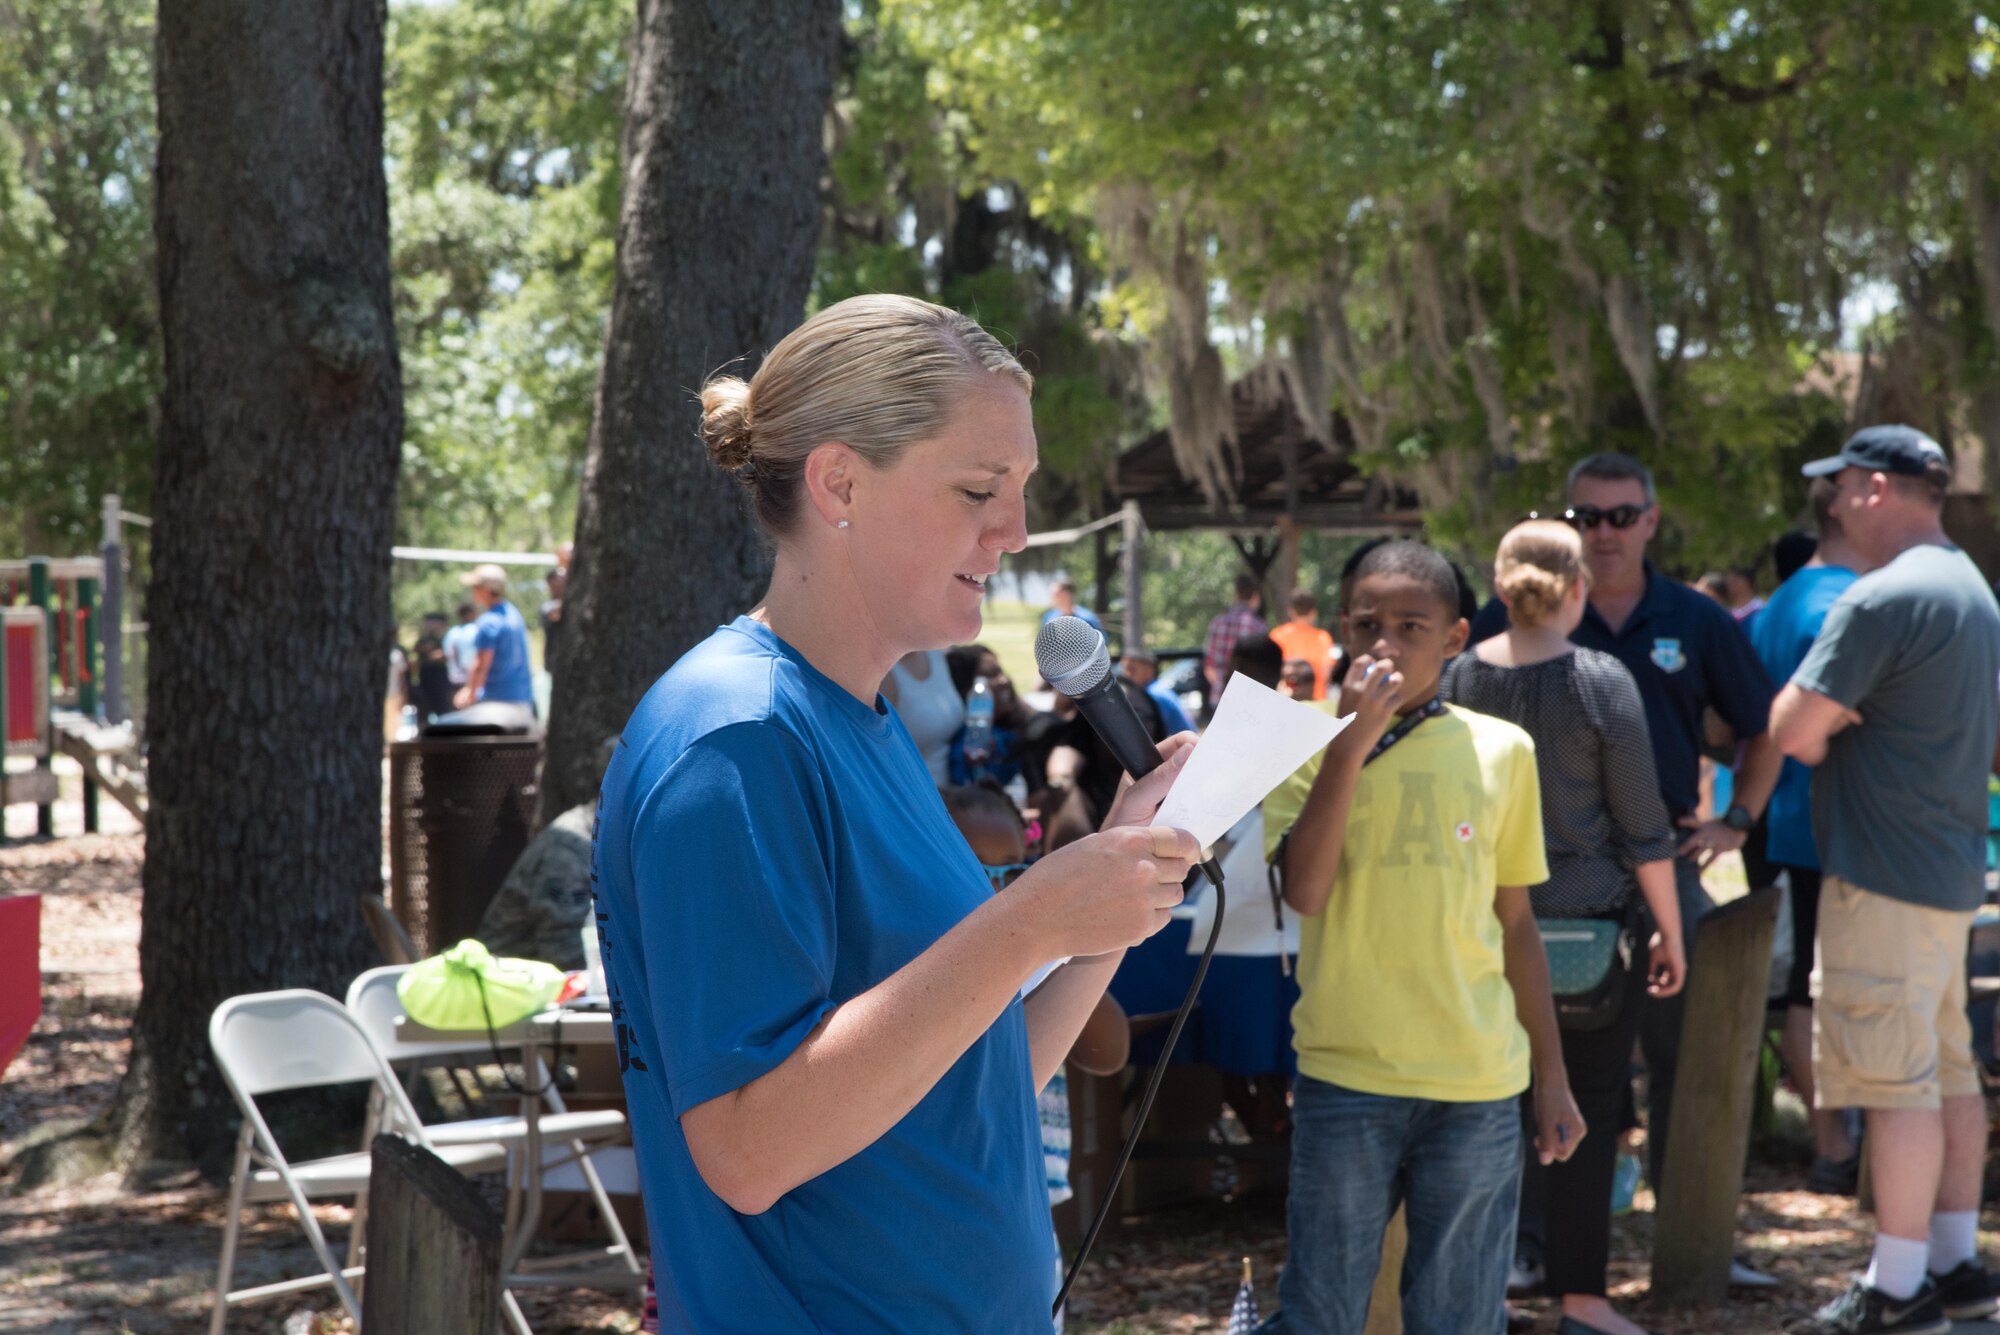 Staff Sgt. Ashley Bever, 403rd Wing Human Resources Development Council vice-chair, reads the names of those who were pied in the face during the 403rd Wing Airman and Family Day picnic May 6, 2017 at Keesler Air Force Base, Mississippi. (U.S. Air Force photo/Maj. Marnee A.C. Losurdo)